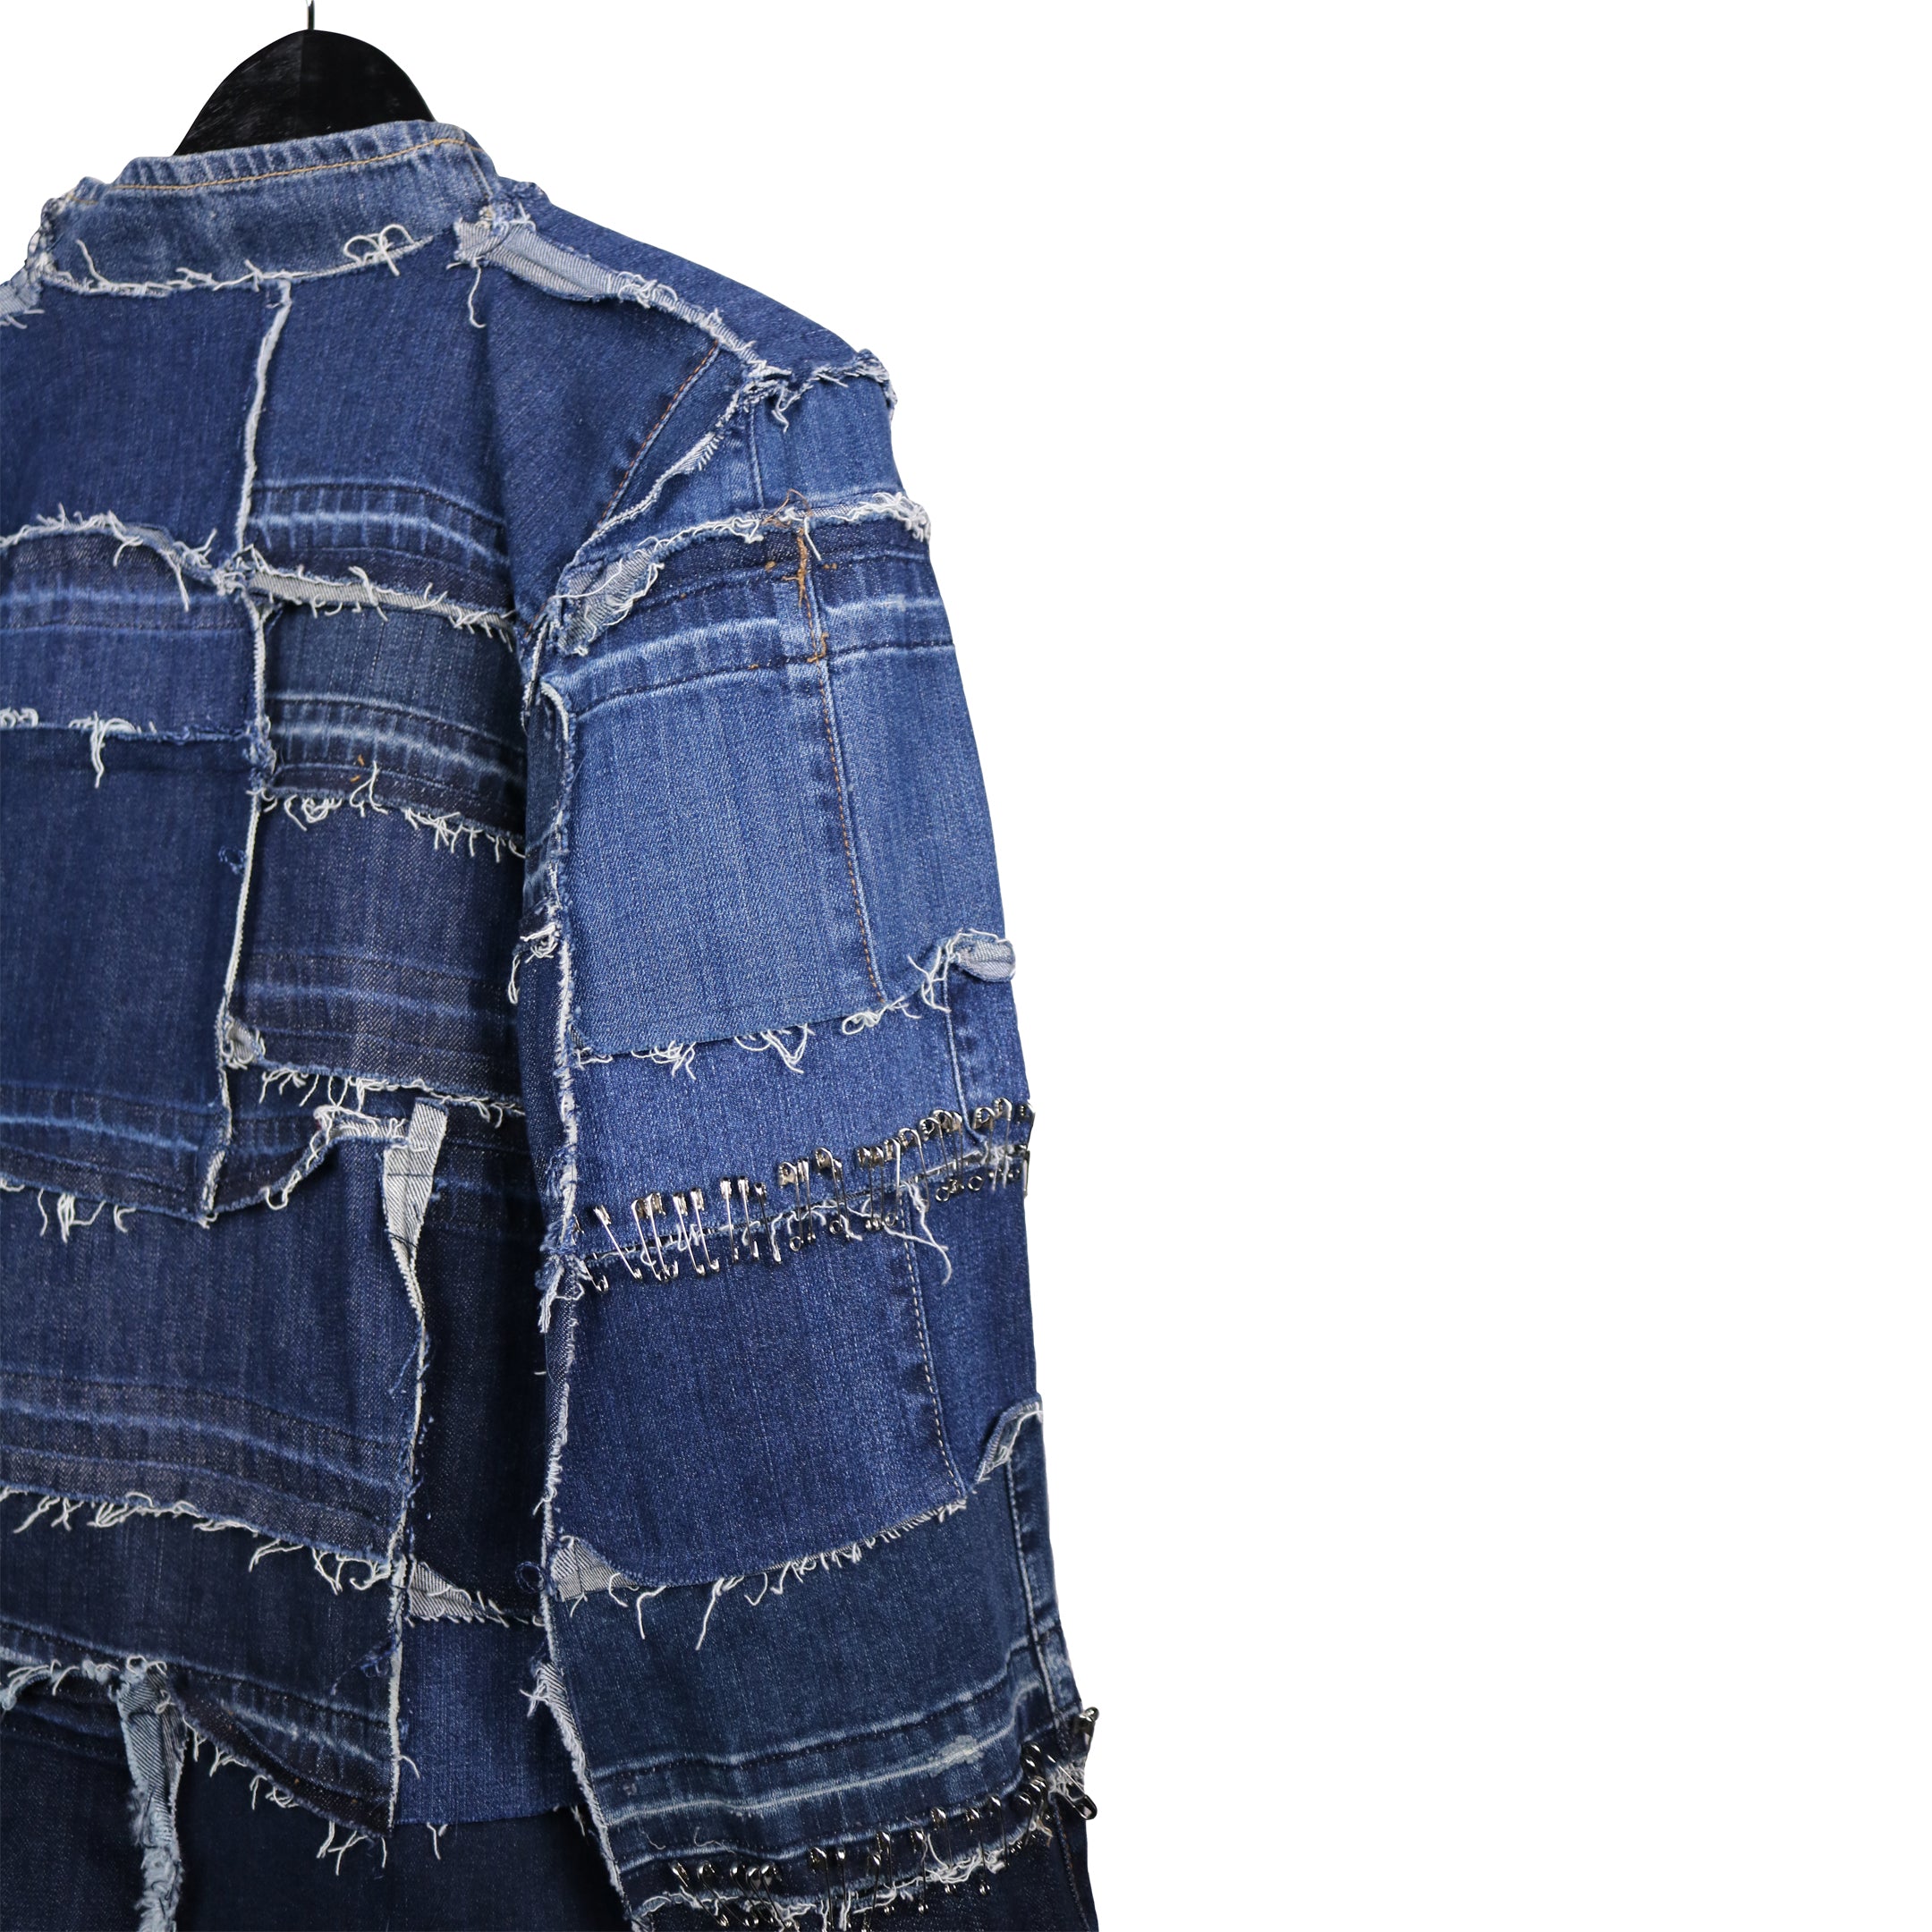 The Sharpest Lives - Upcycled Denim Jacket with Safety Pin Sleeves